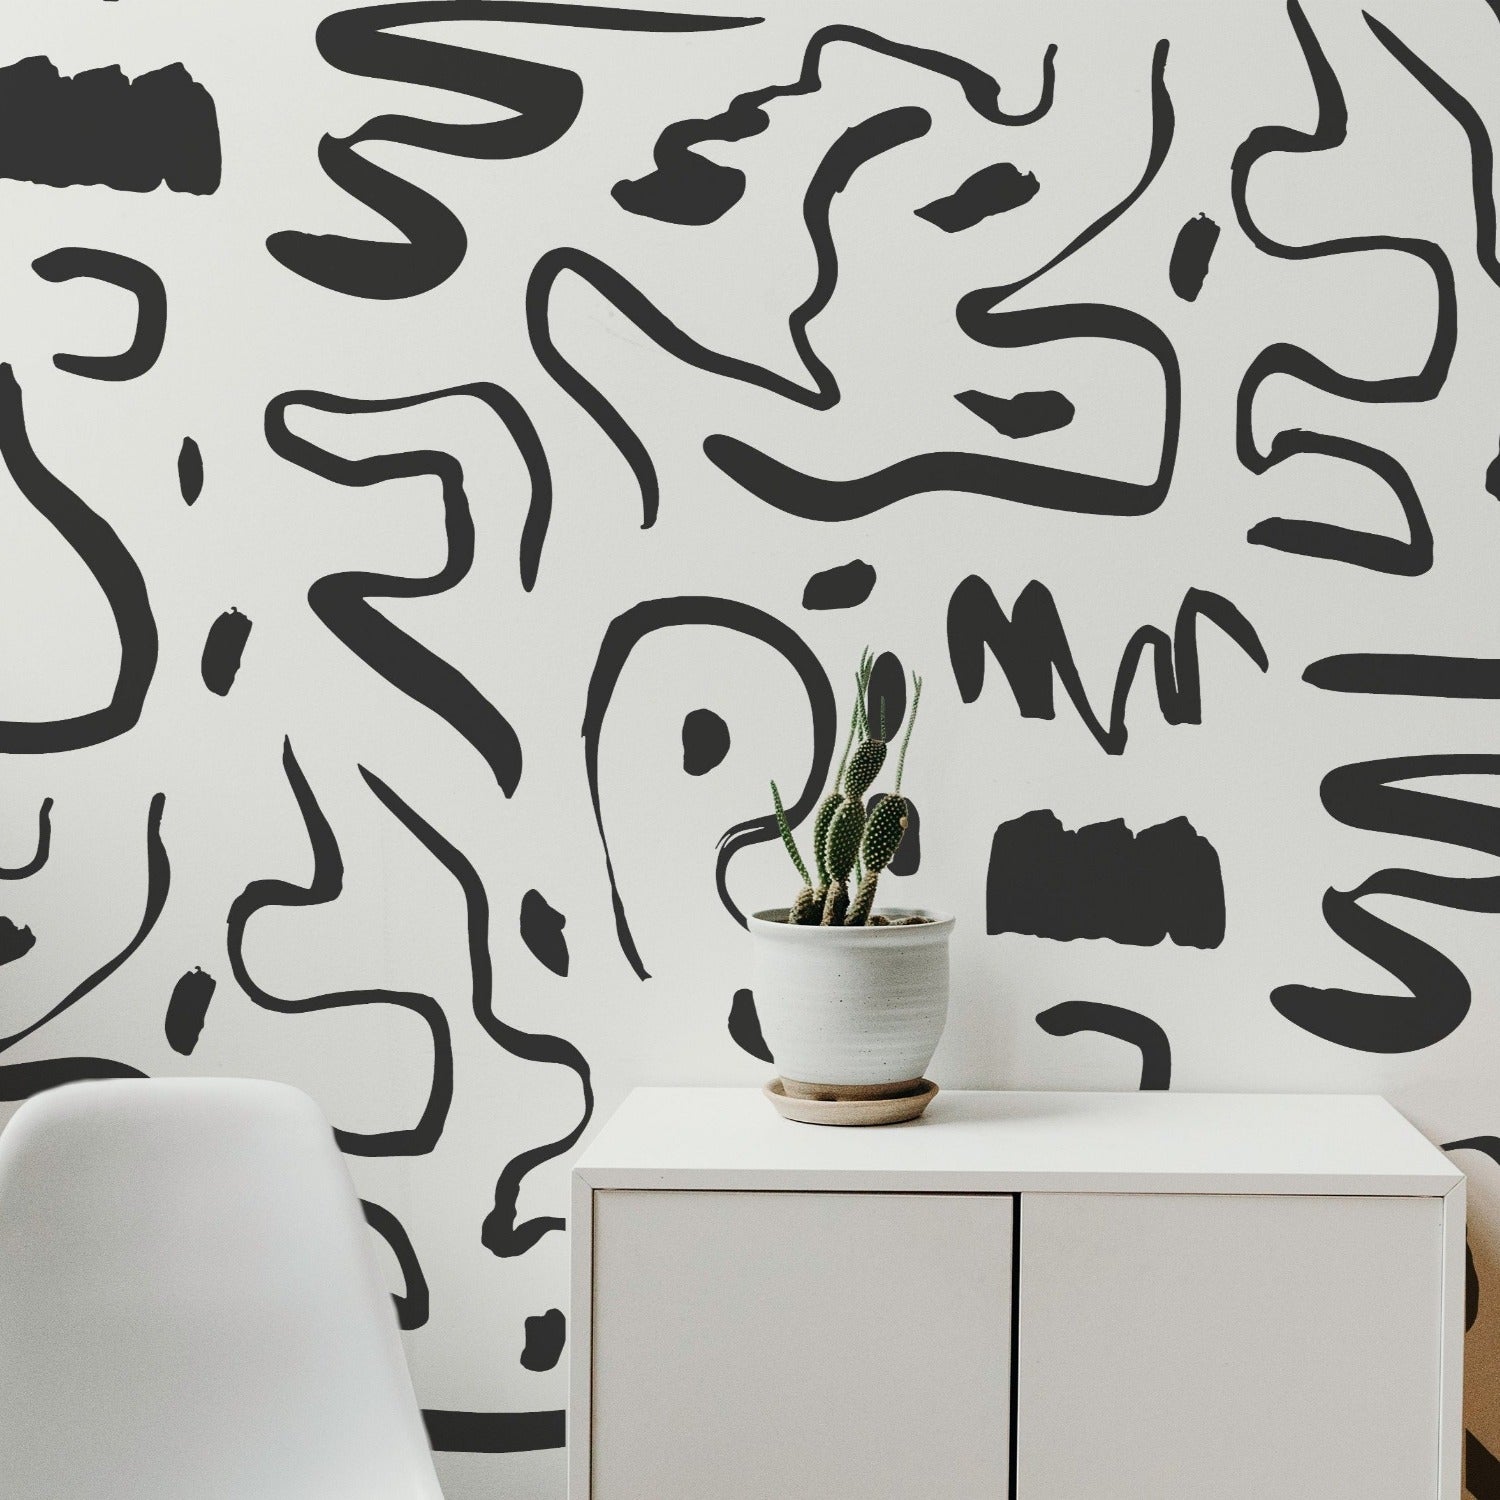 Modern and minimalist interior with a simple white cabinet and a cactus plant, set against a wall covered with Abstract Fusion Wallpaper. The wallpaper displays an intricate black on white abstract pattern, adding a bold artistic touch to the space.